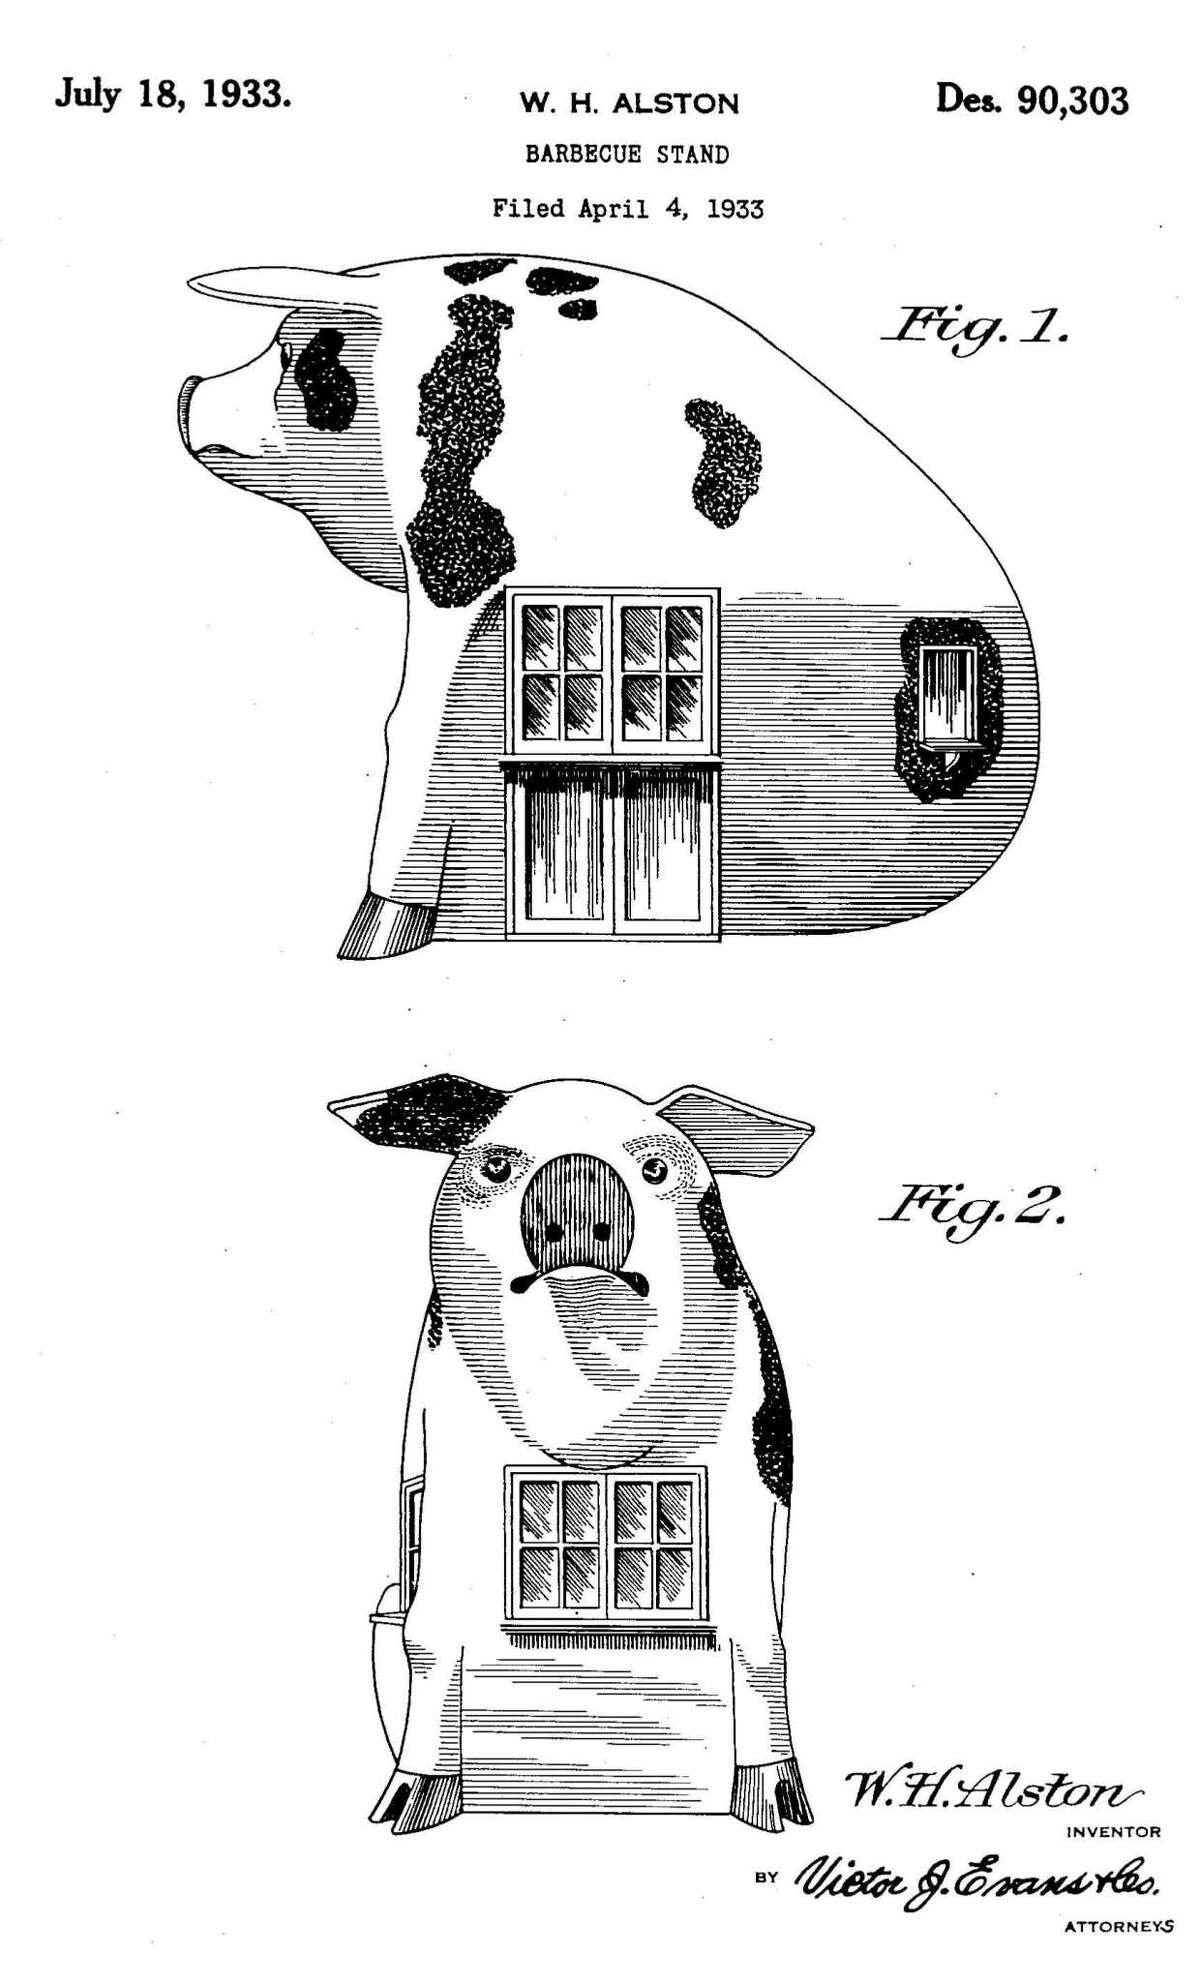 Illustrations of a pig-shaped barbecue stand from a 1933 patent application by William H. Alston of San Antonio. A similar structure at the old Pig Stand location in Southtown was reportedly built in 1935.